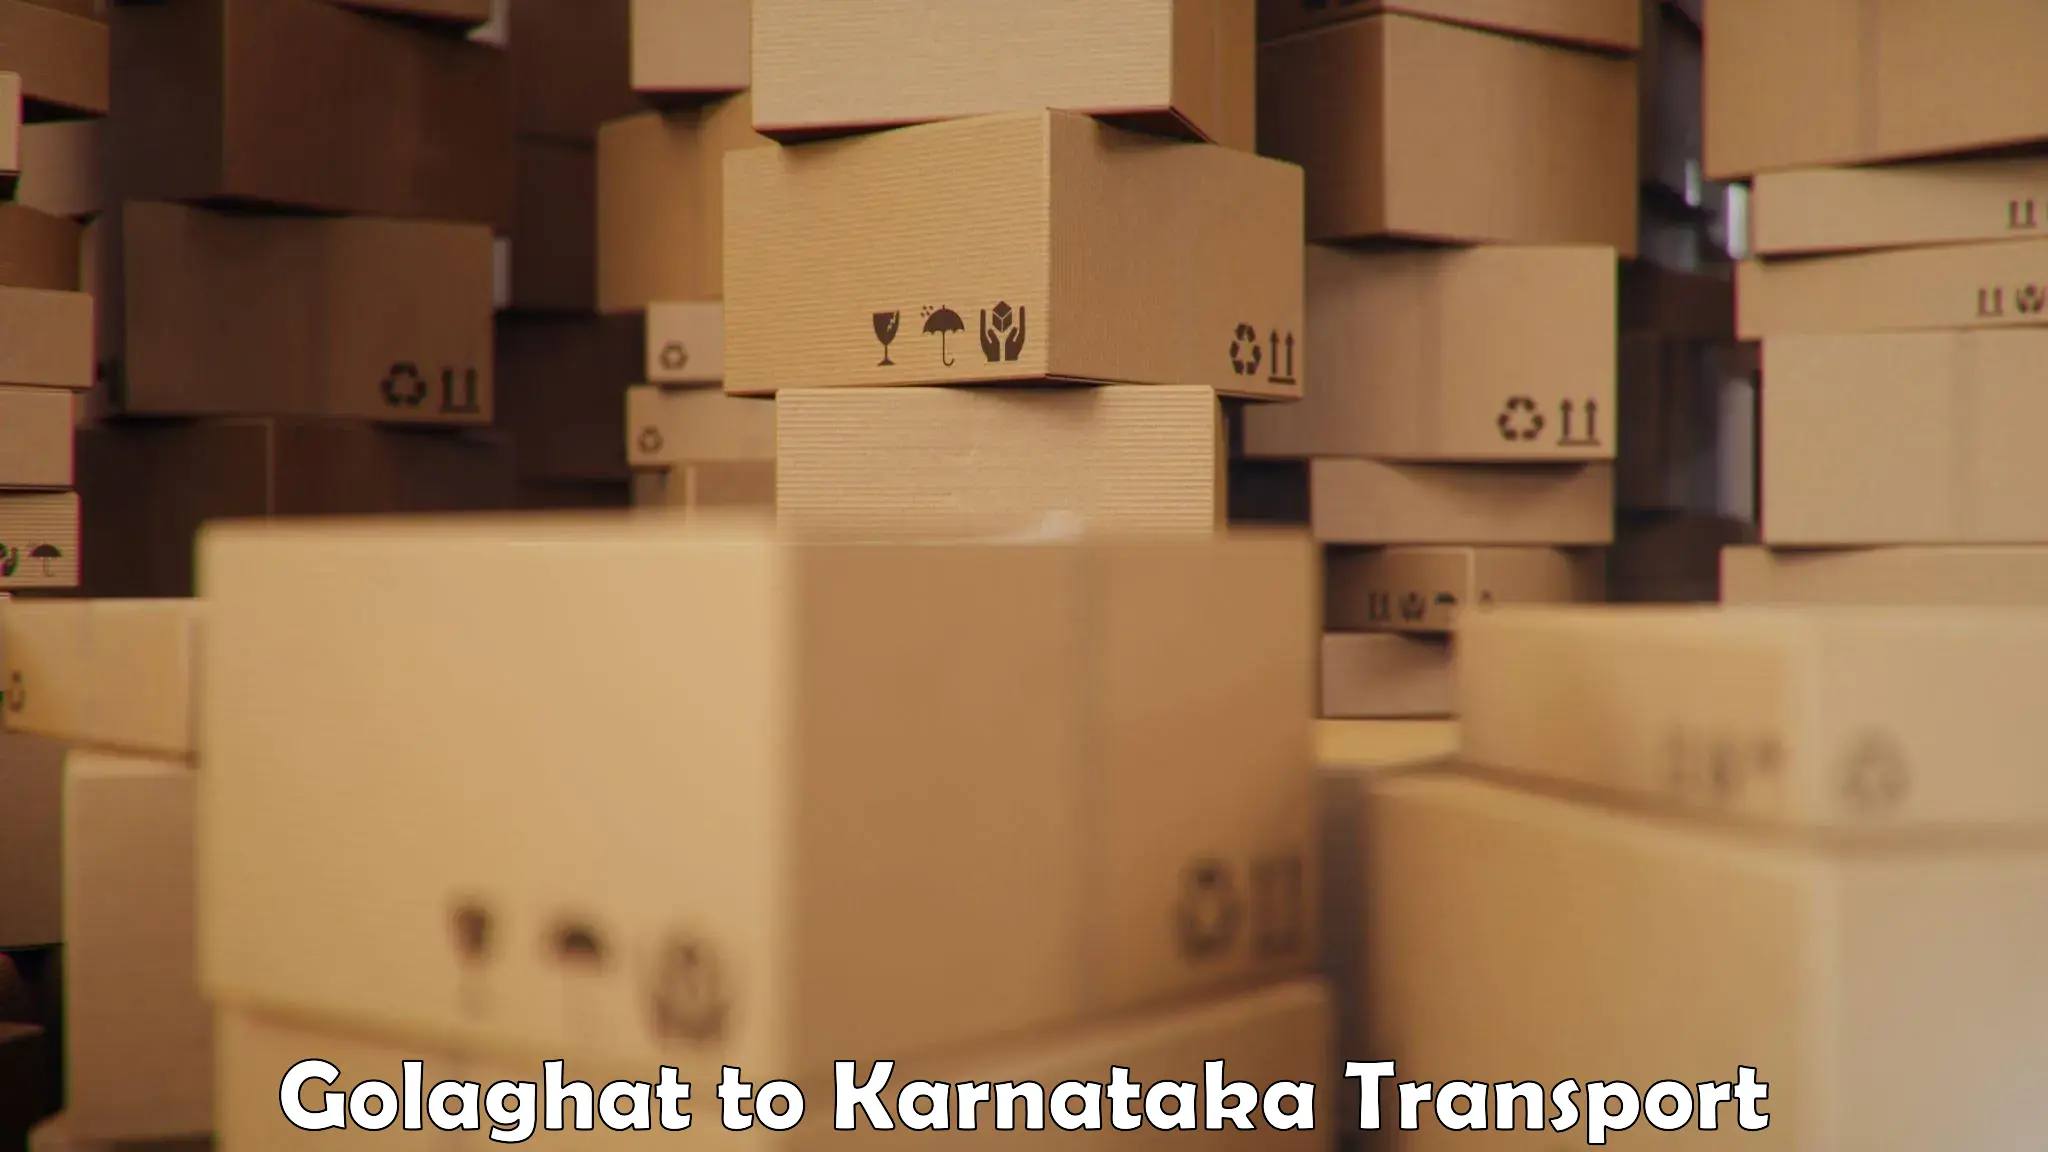 Container transport service Golaghat to Karnataka